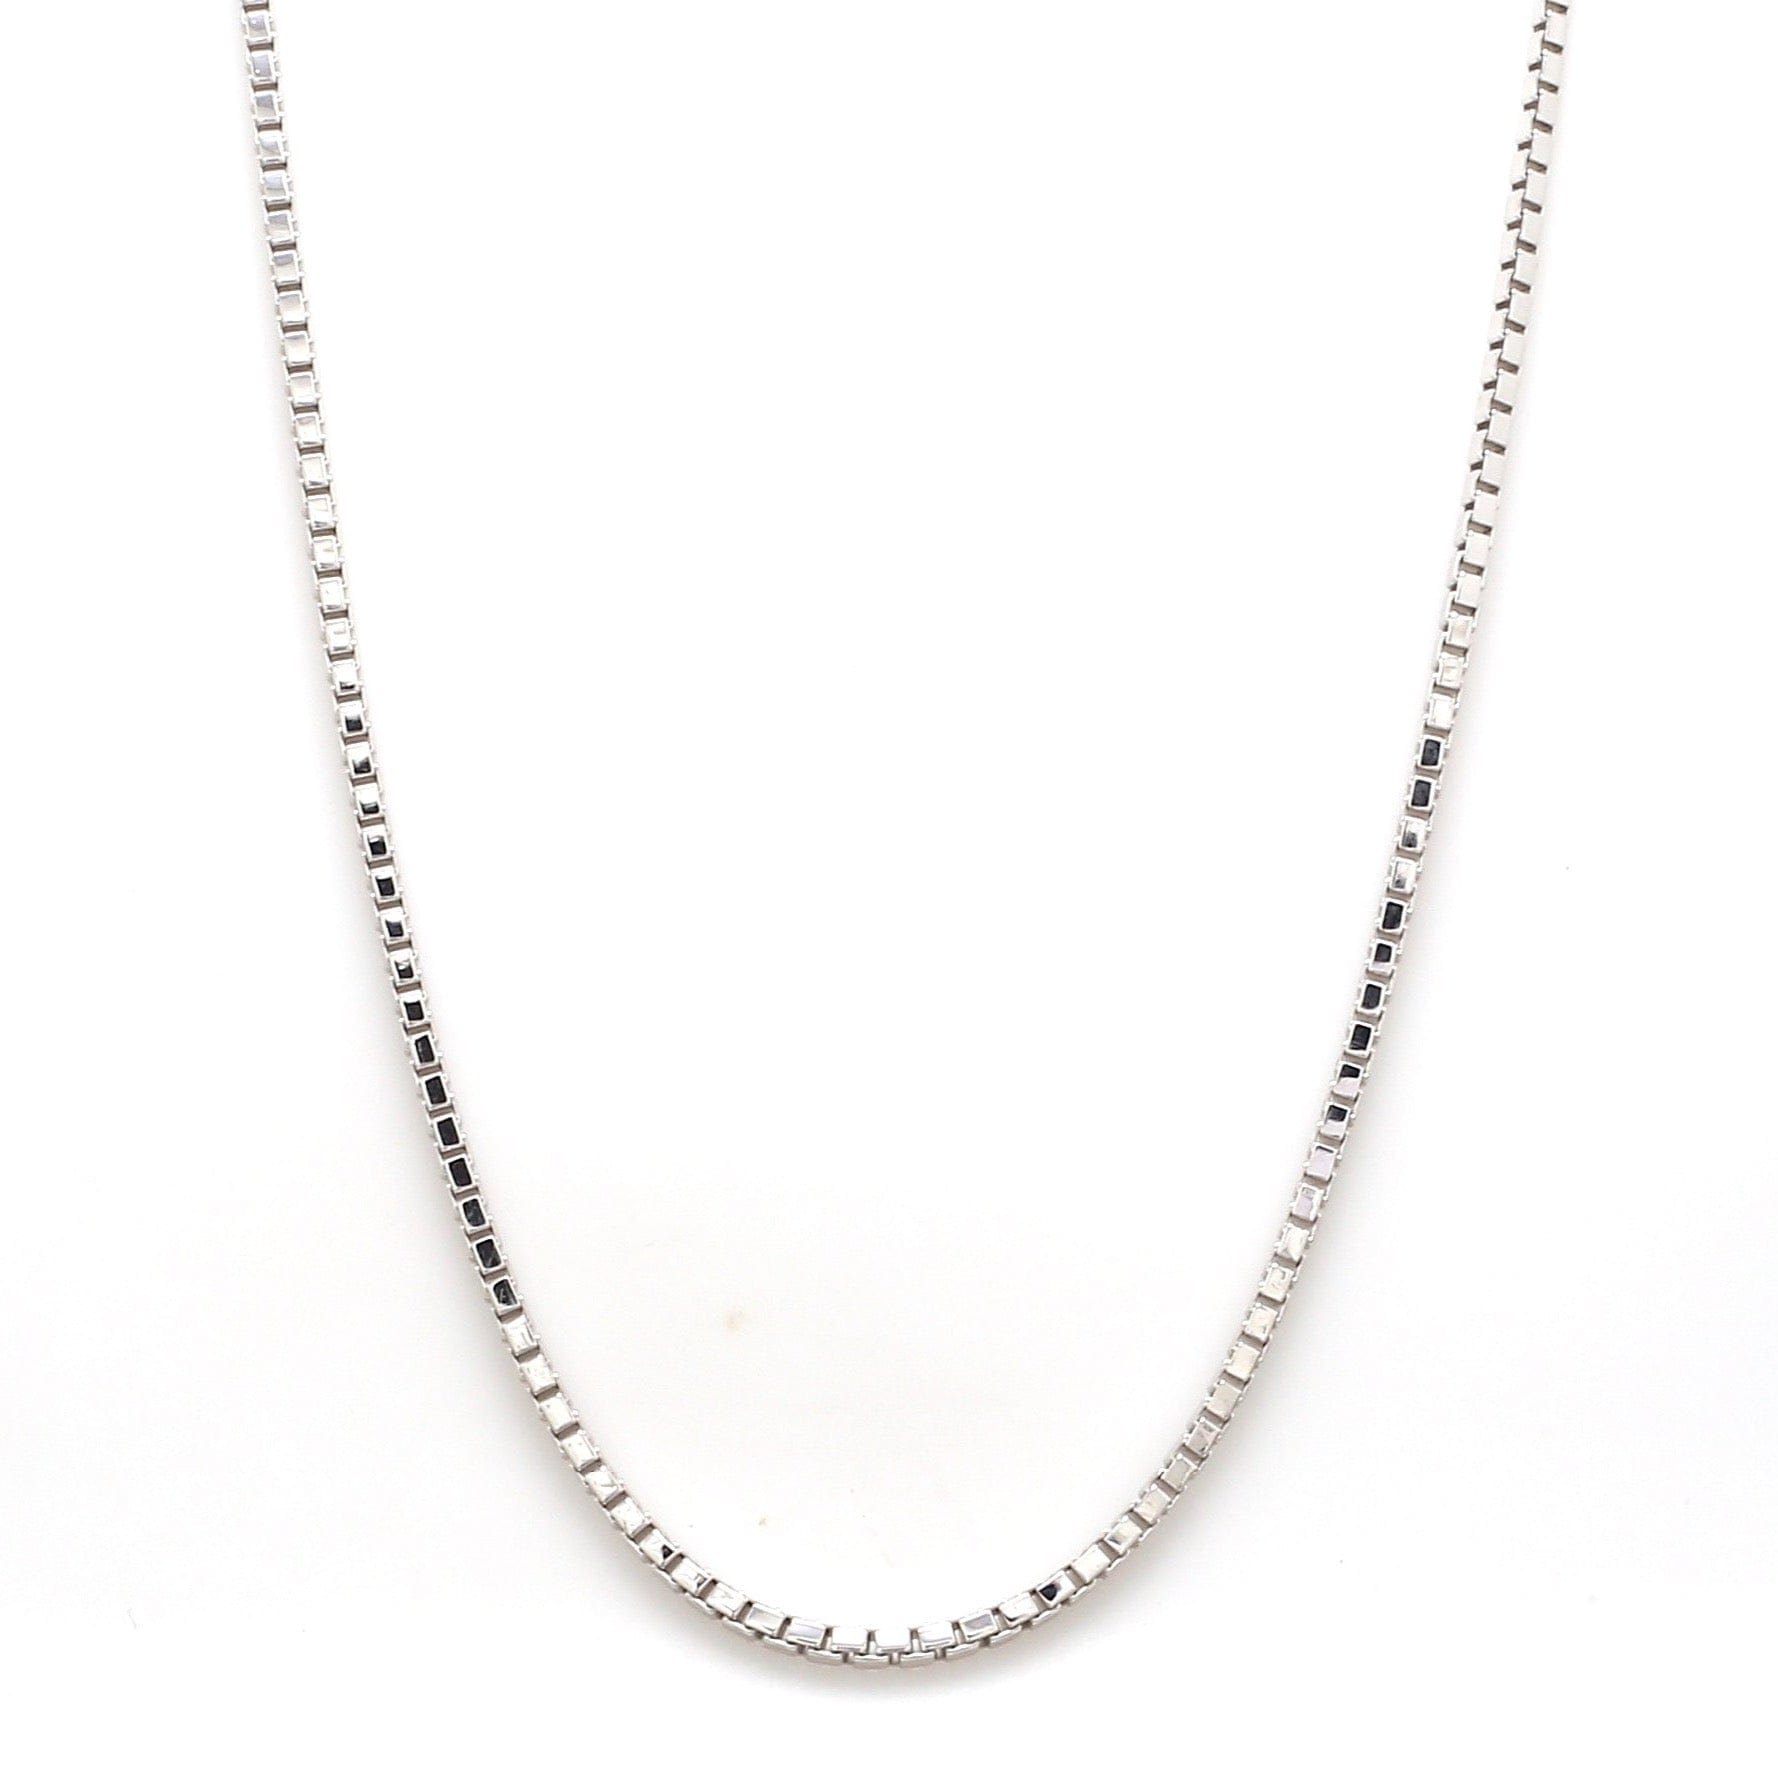 Solid Box Chain Necklace 10K White Gold 20